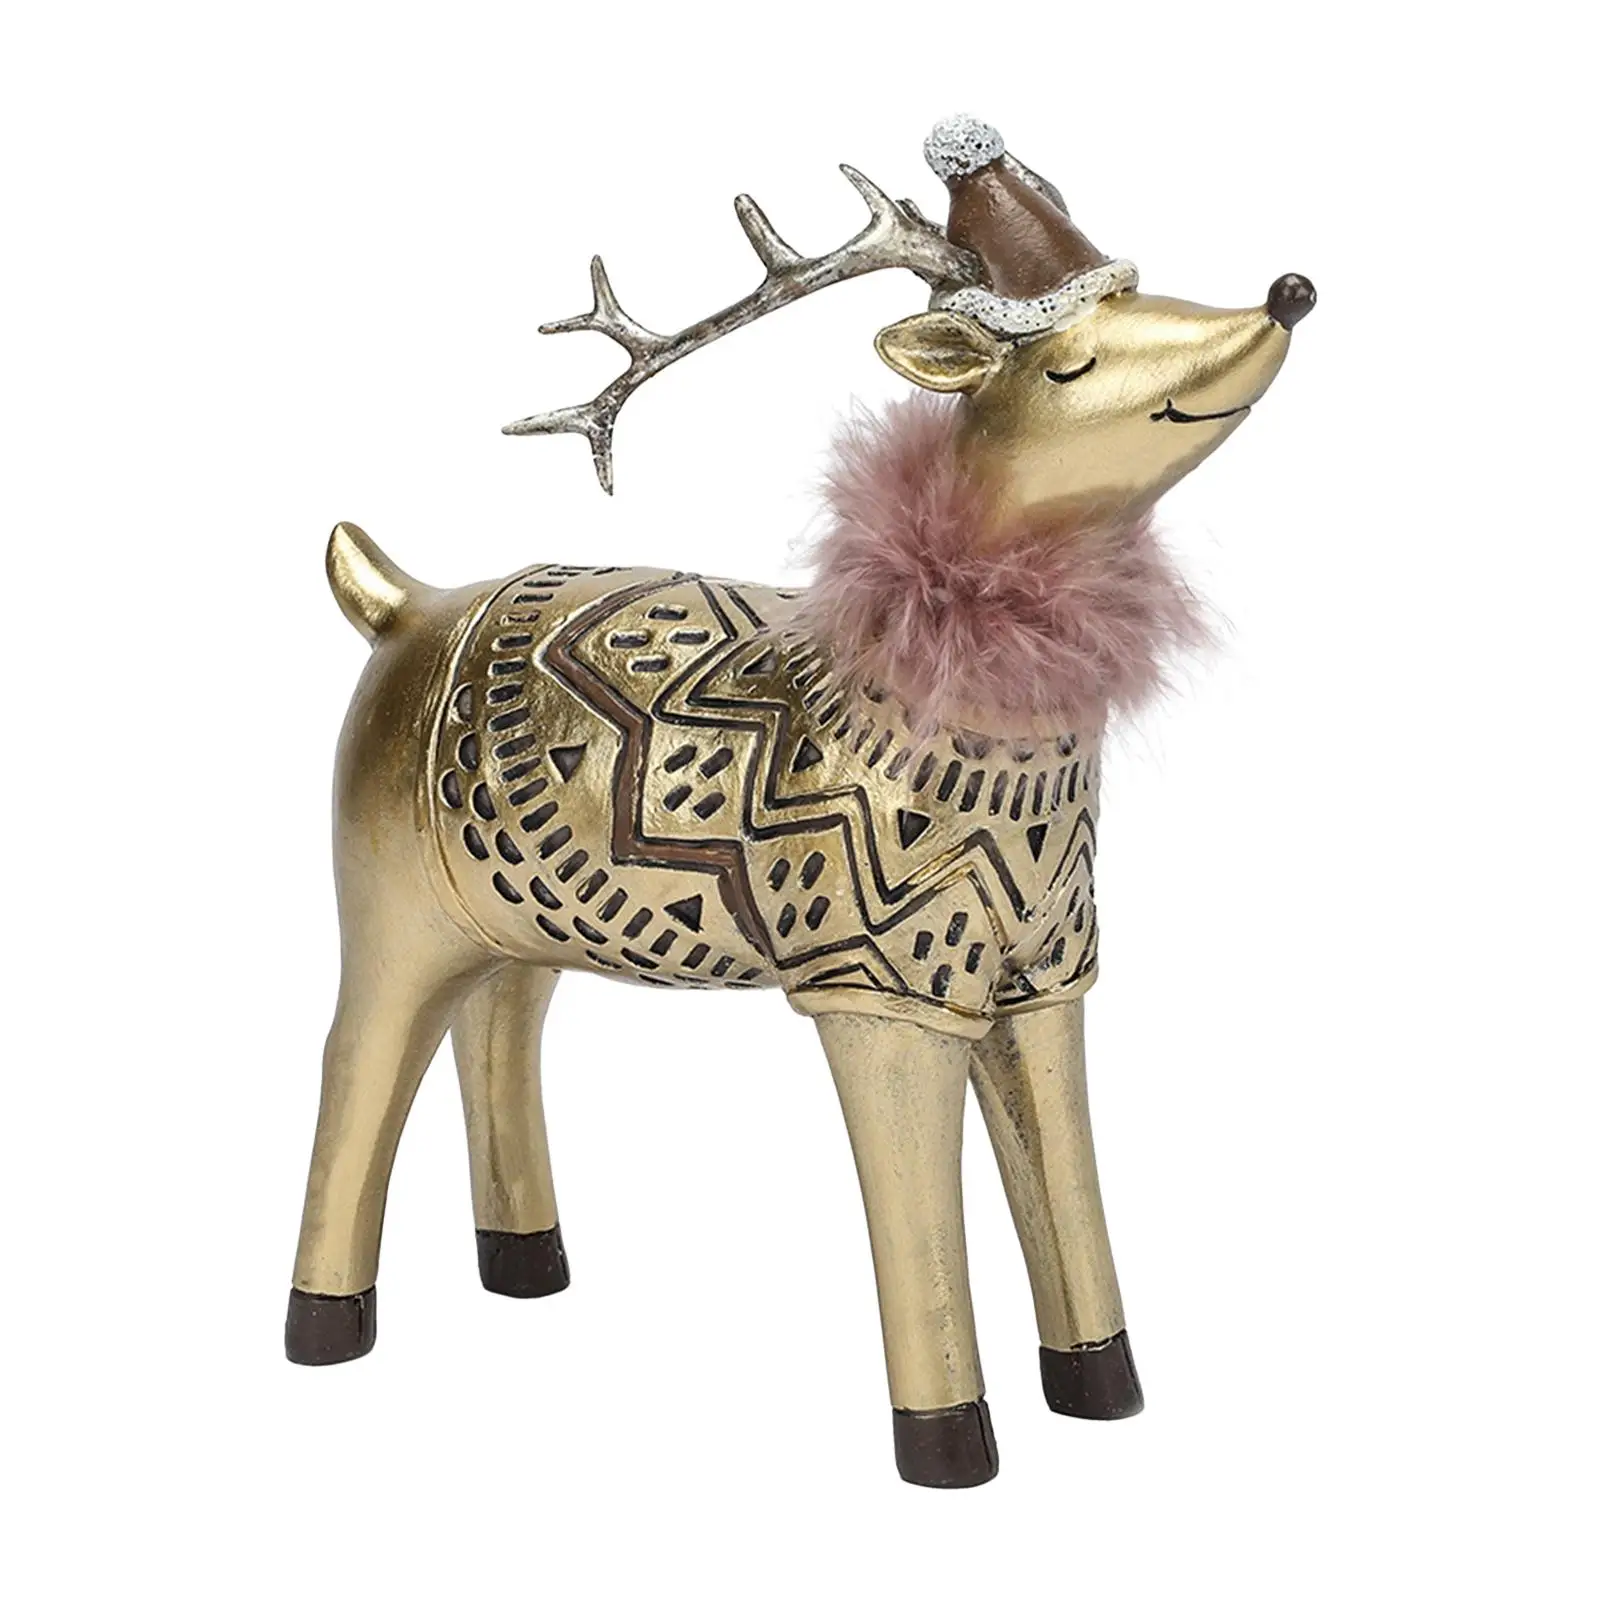 Elk Resin Statue Christmas Ornament Deer Figurine Decor for New Year Party